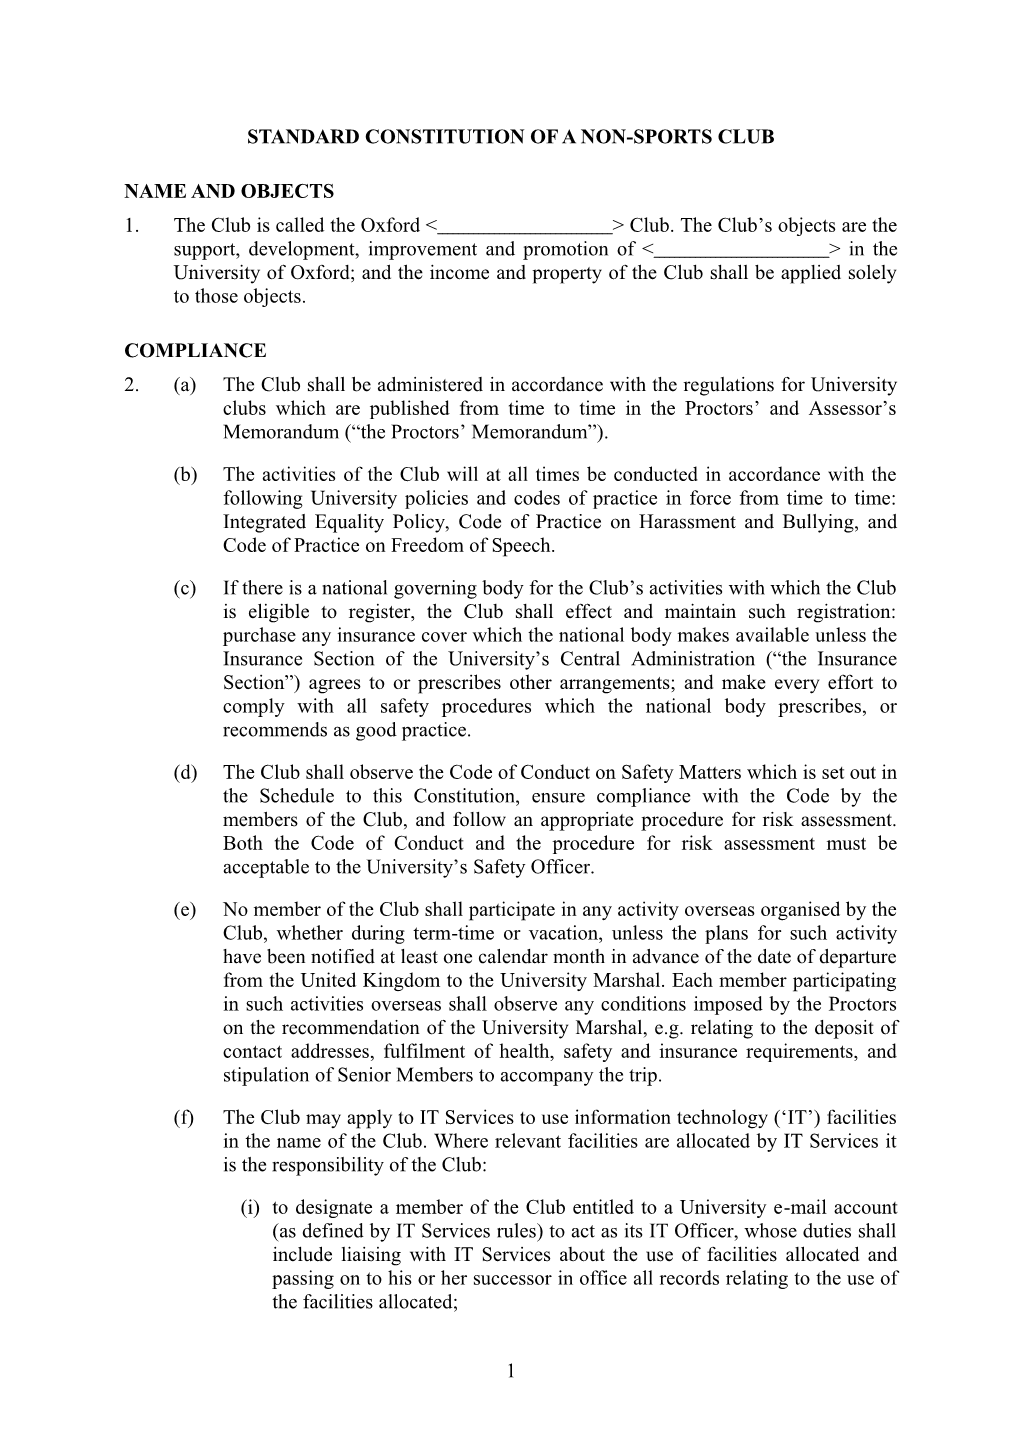 M02 Constitution for Registered Non-Sports Club WD217-096